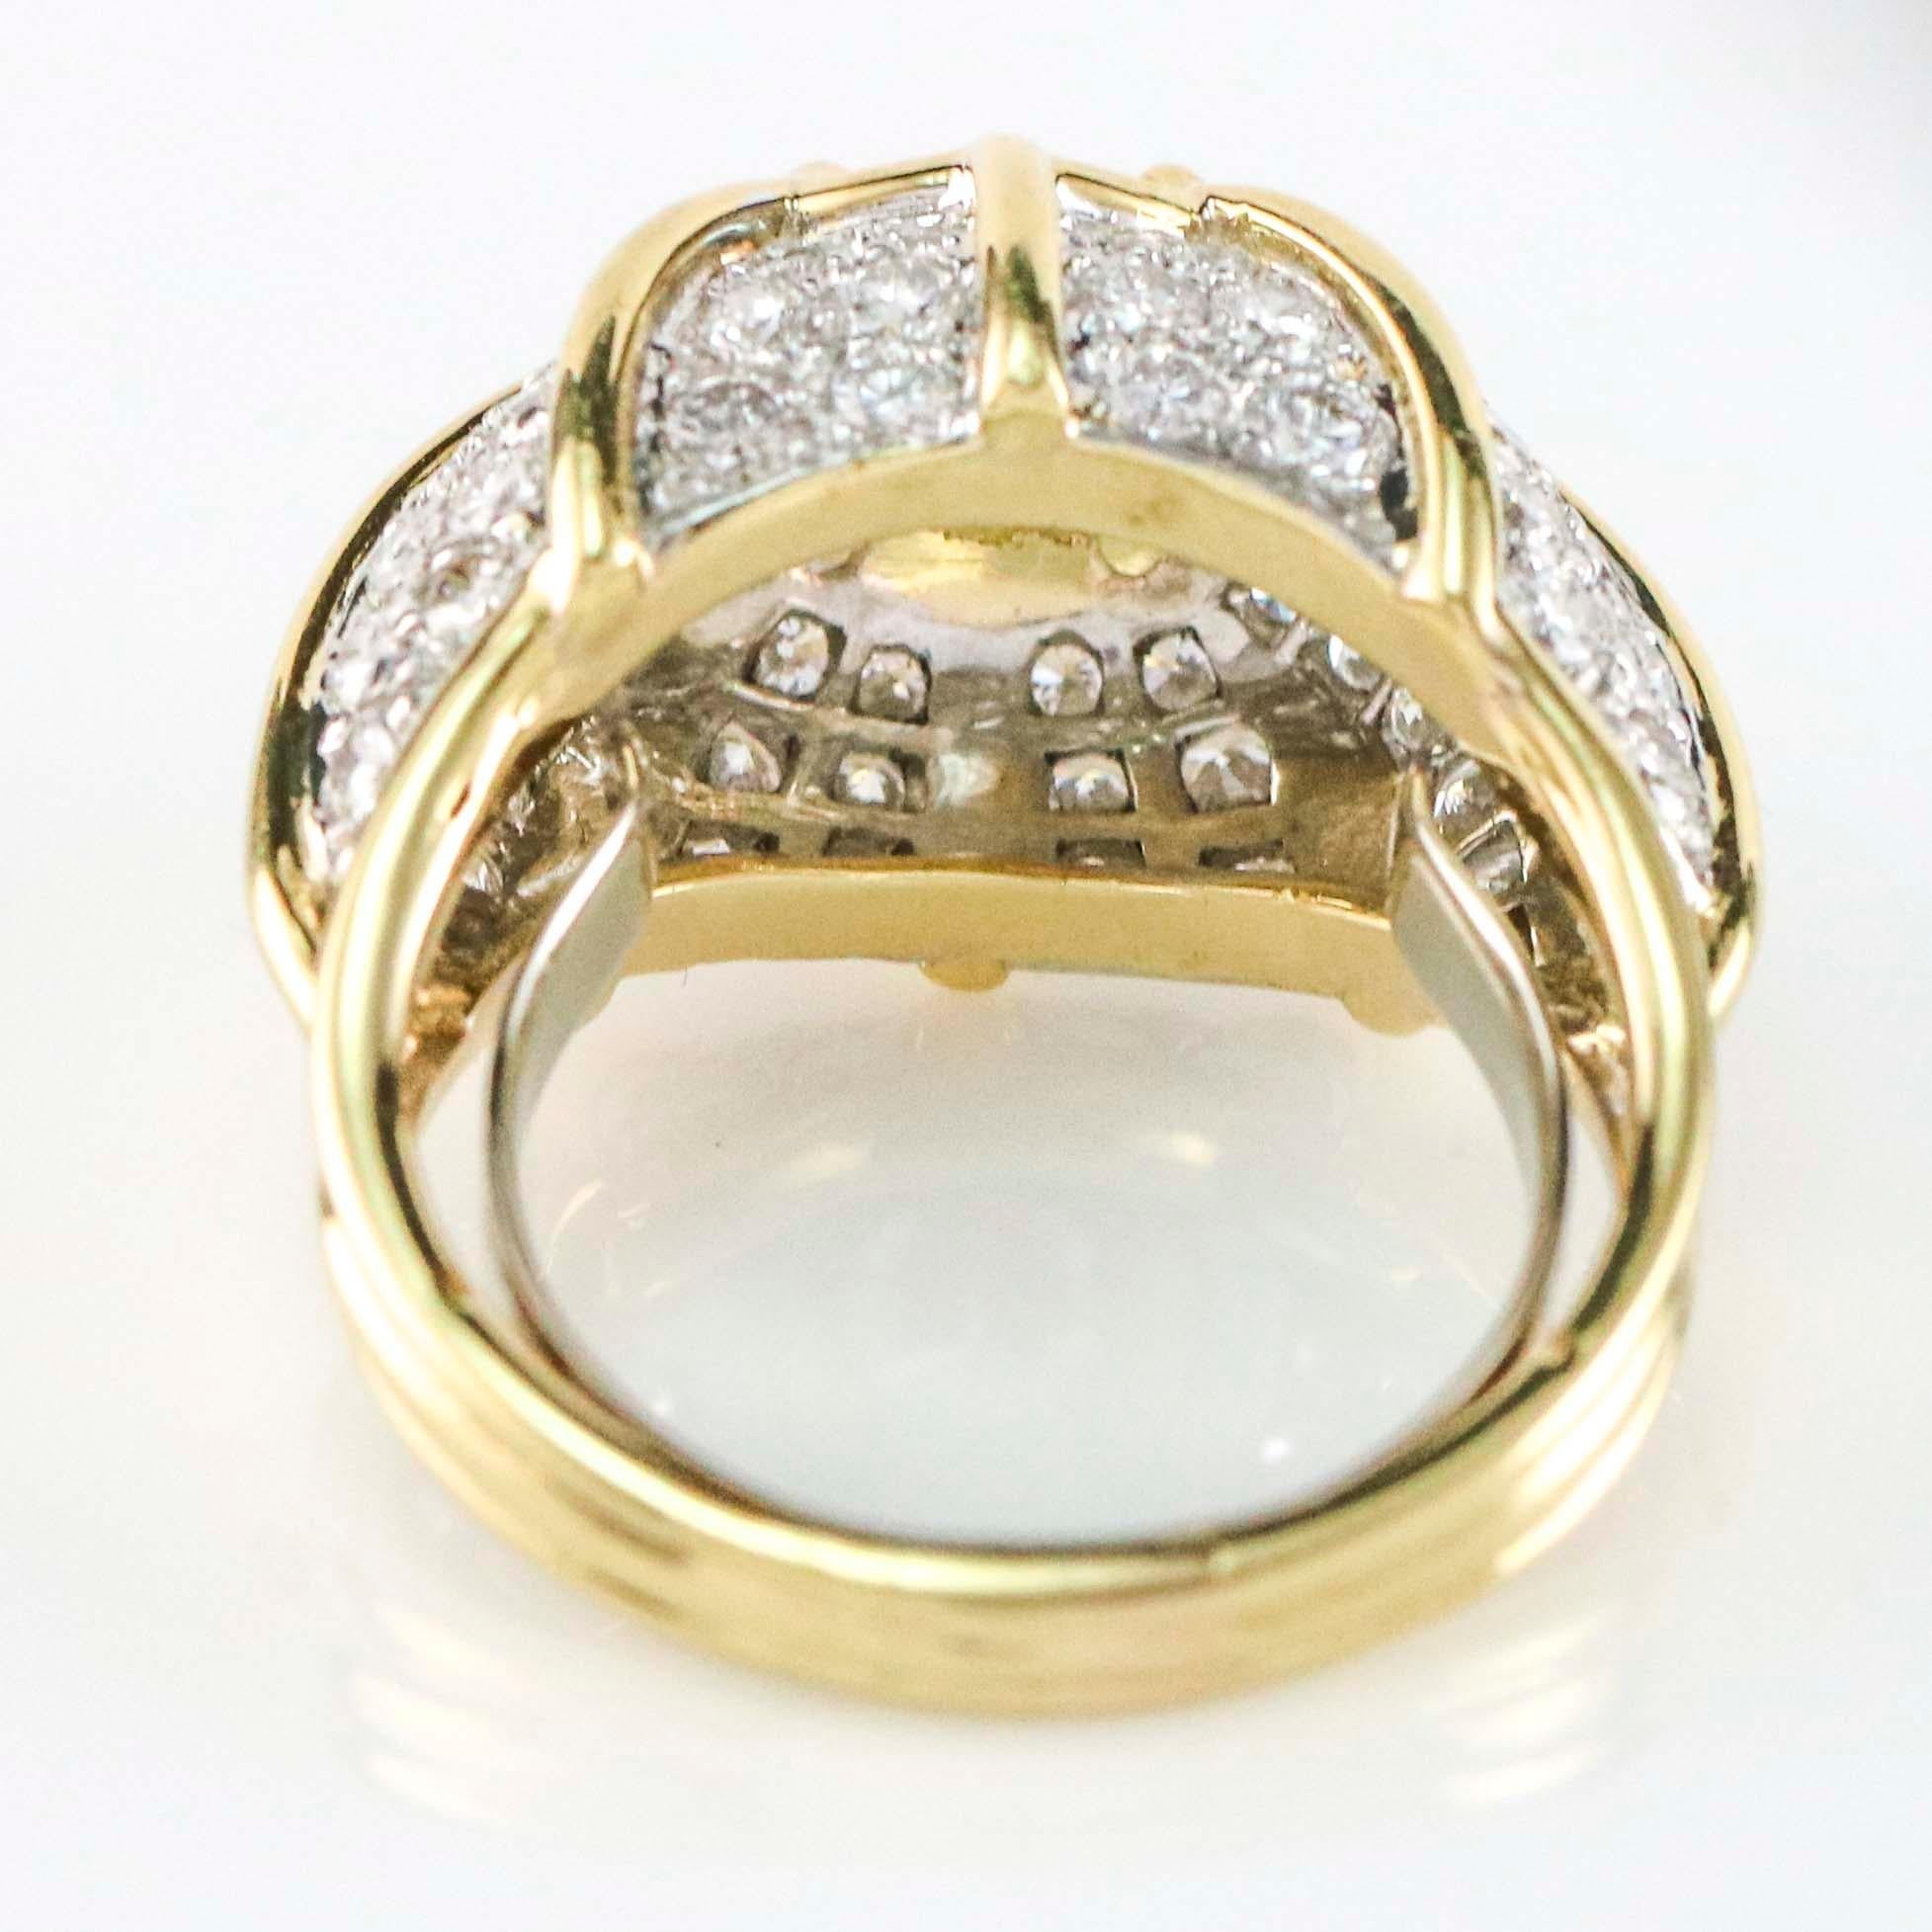 EGL Certified 1.29 Carat Platinum 18 Karat Yellow Gold Diamond Dome Ring In Excellent Condition For Sale In Fort Lauderdale, FL